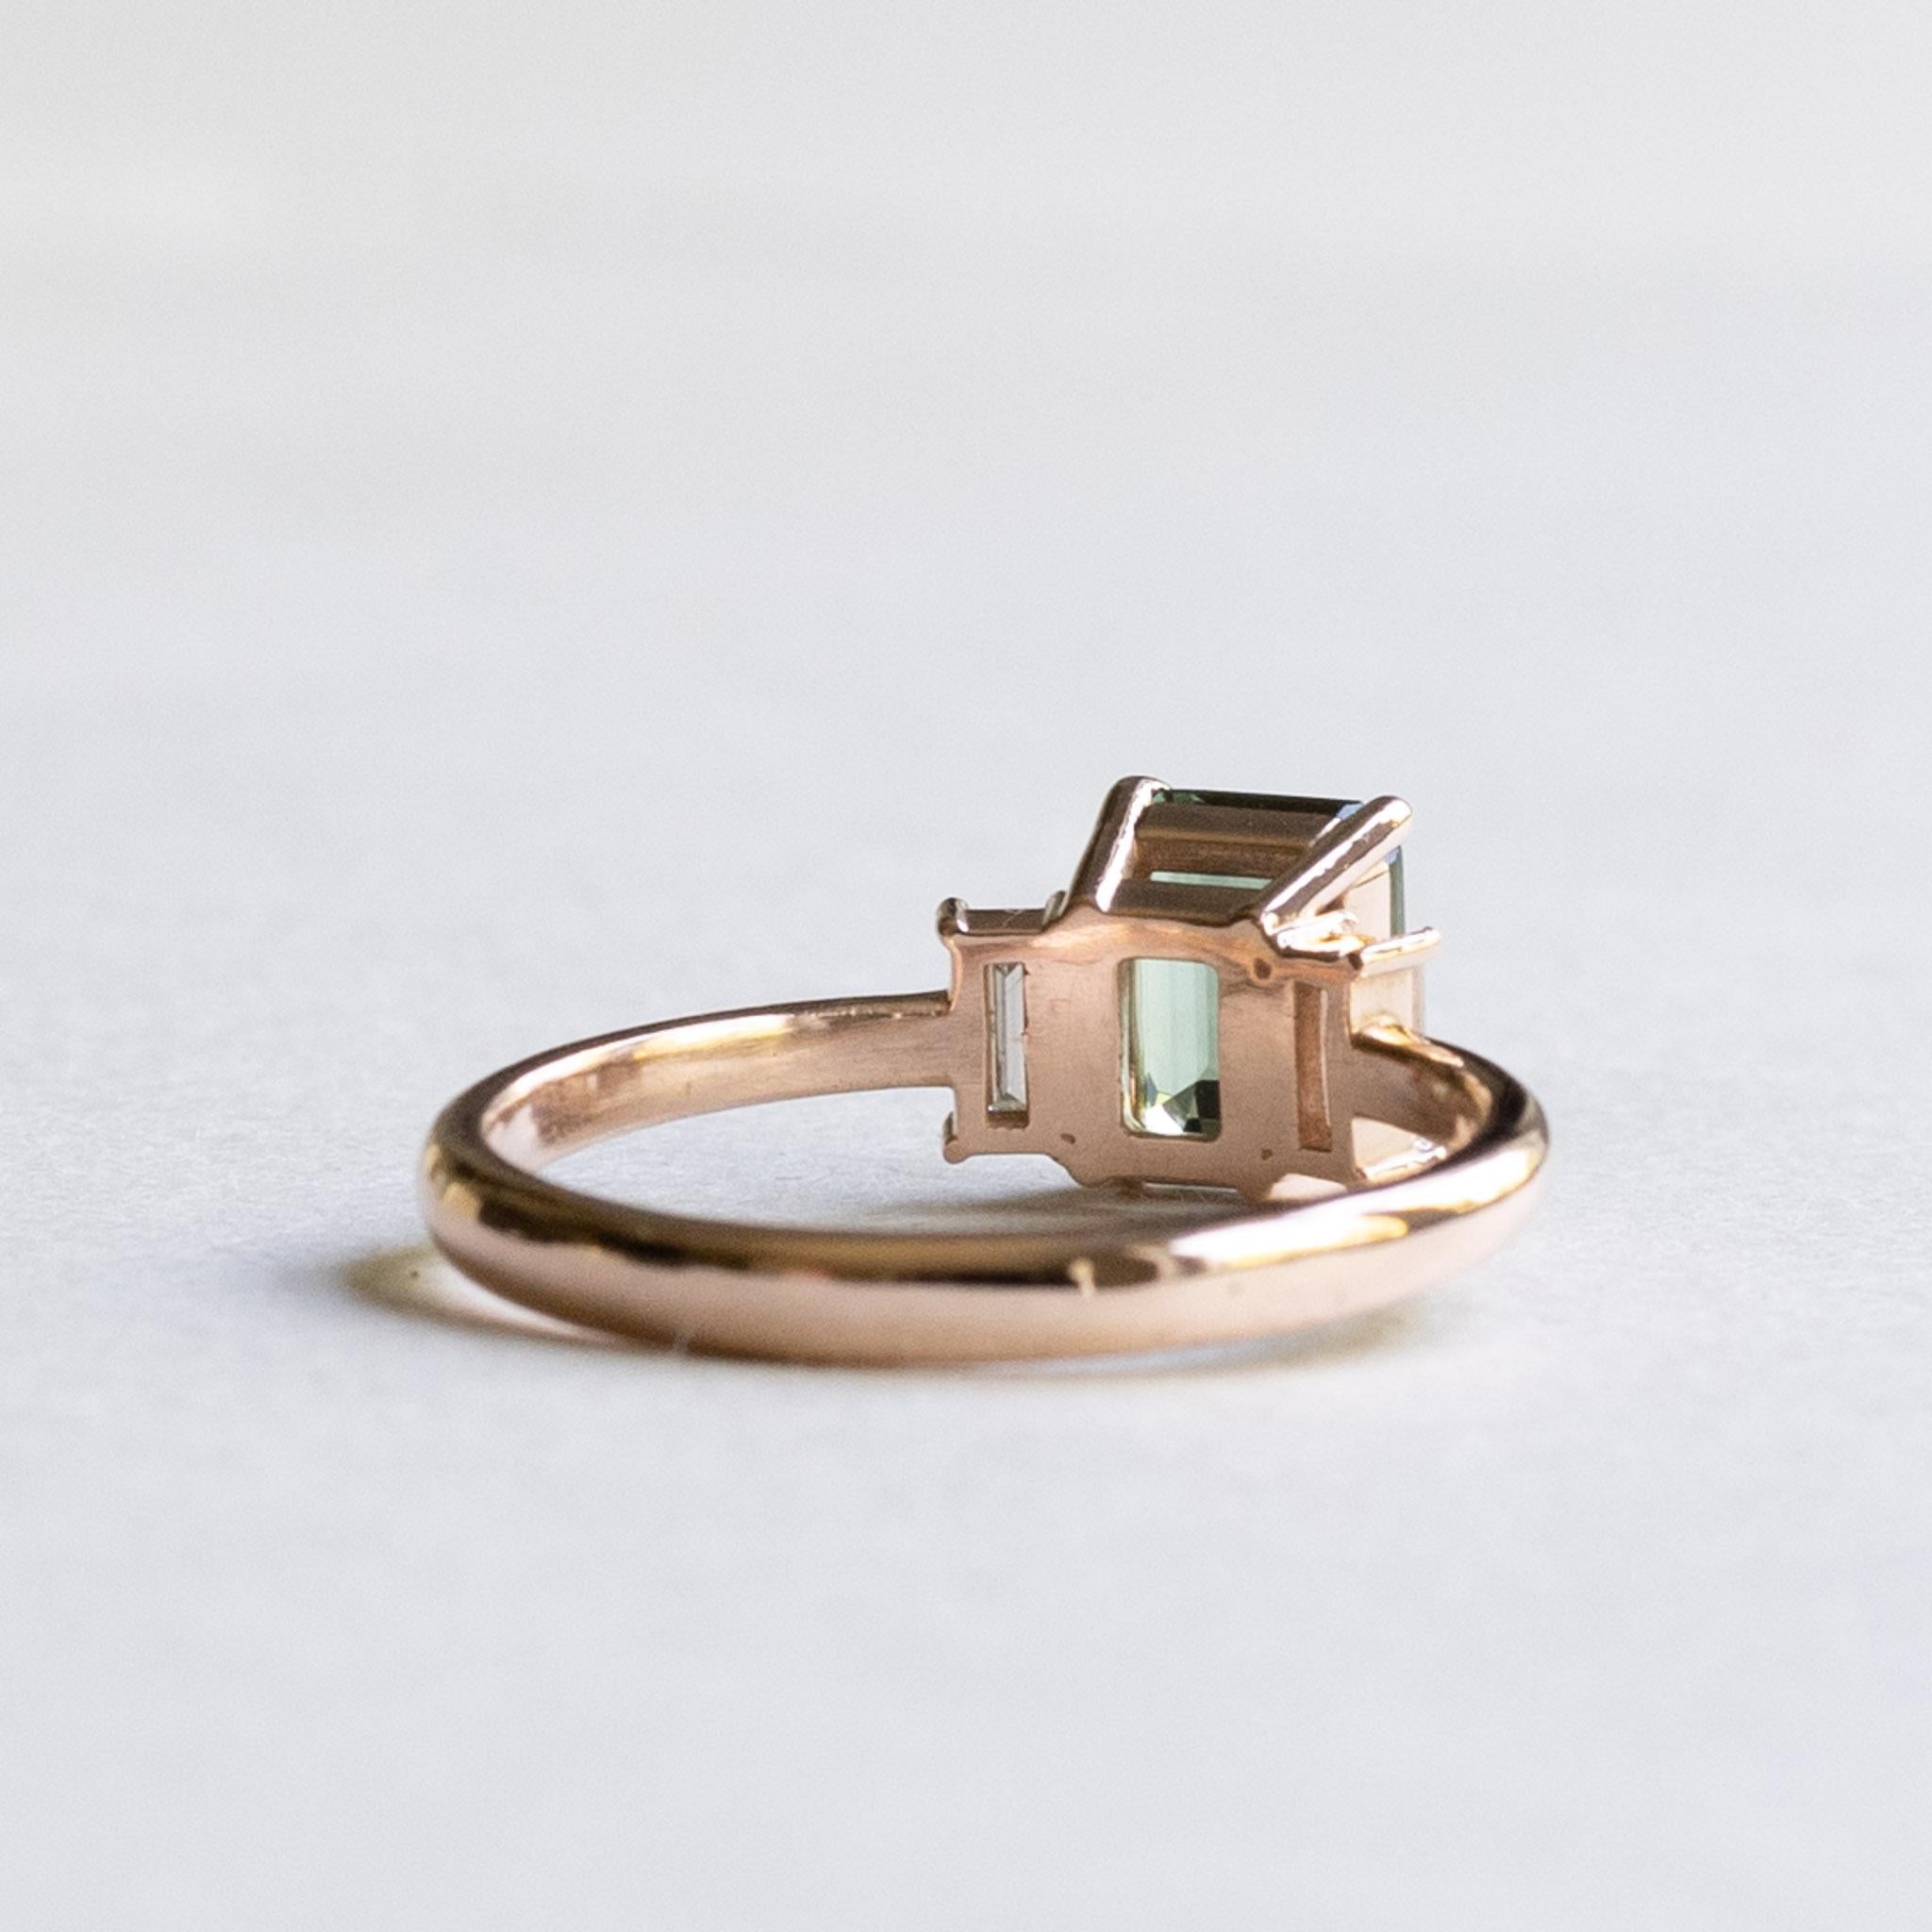 For Sale:  Green Tourmaline Emerald Cut Ring with Baguette Diamonds, Three Stone Ring 7